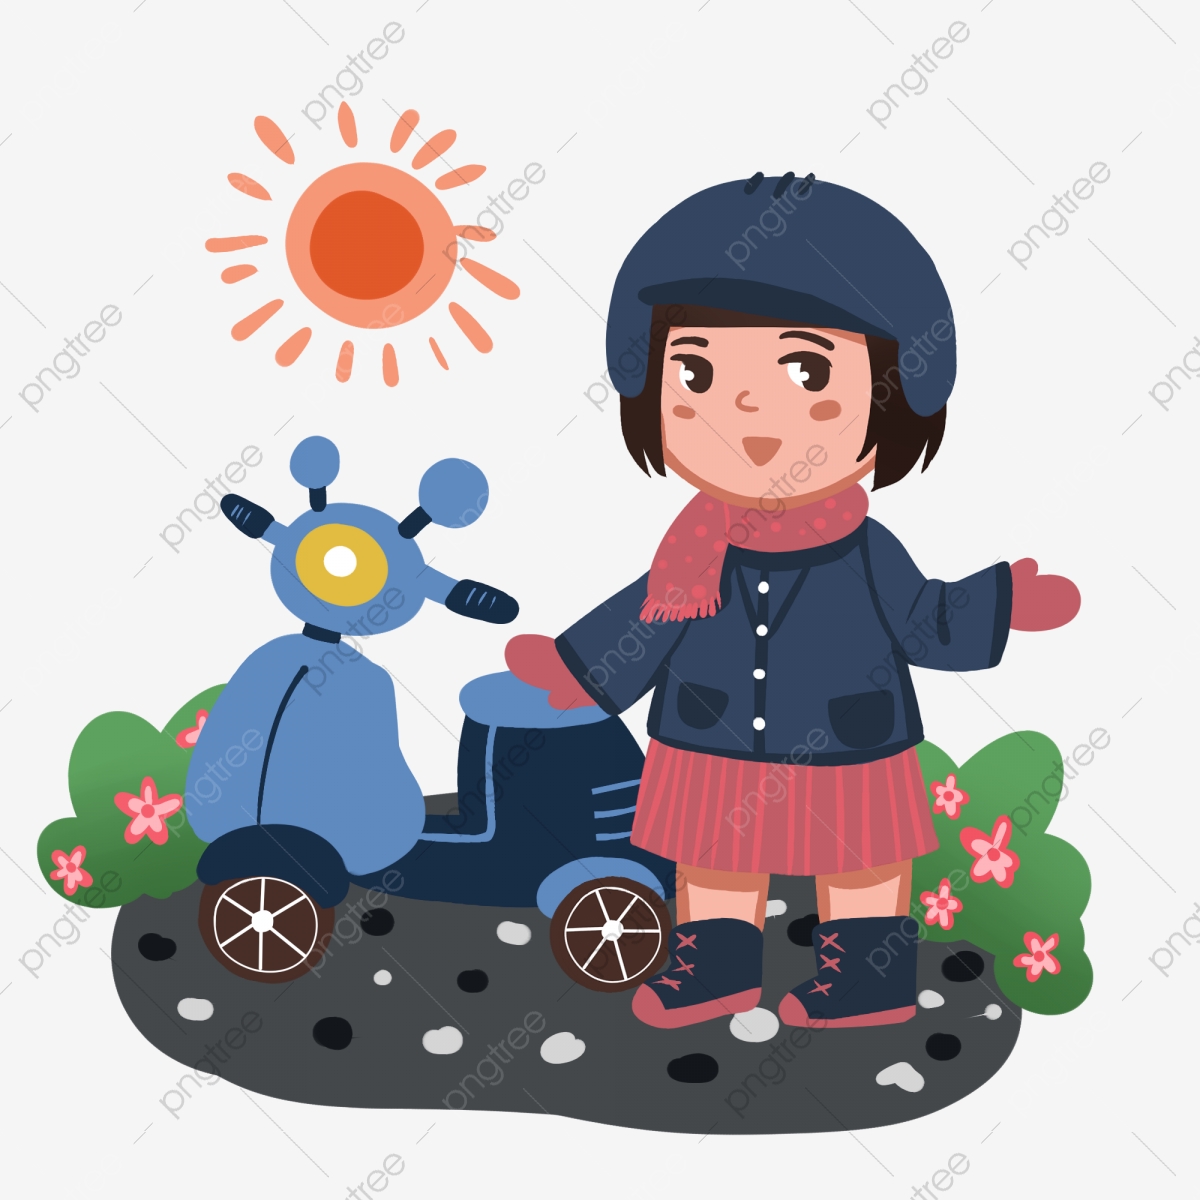 safe clipart vehicle safety